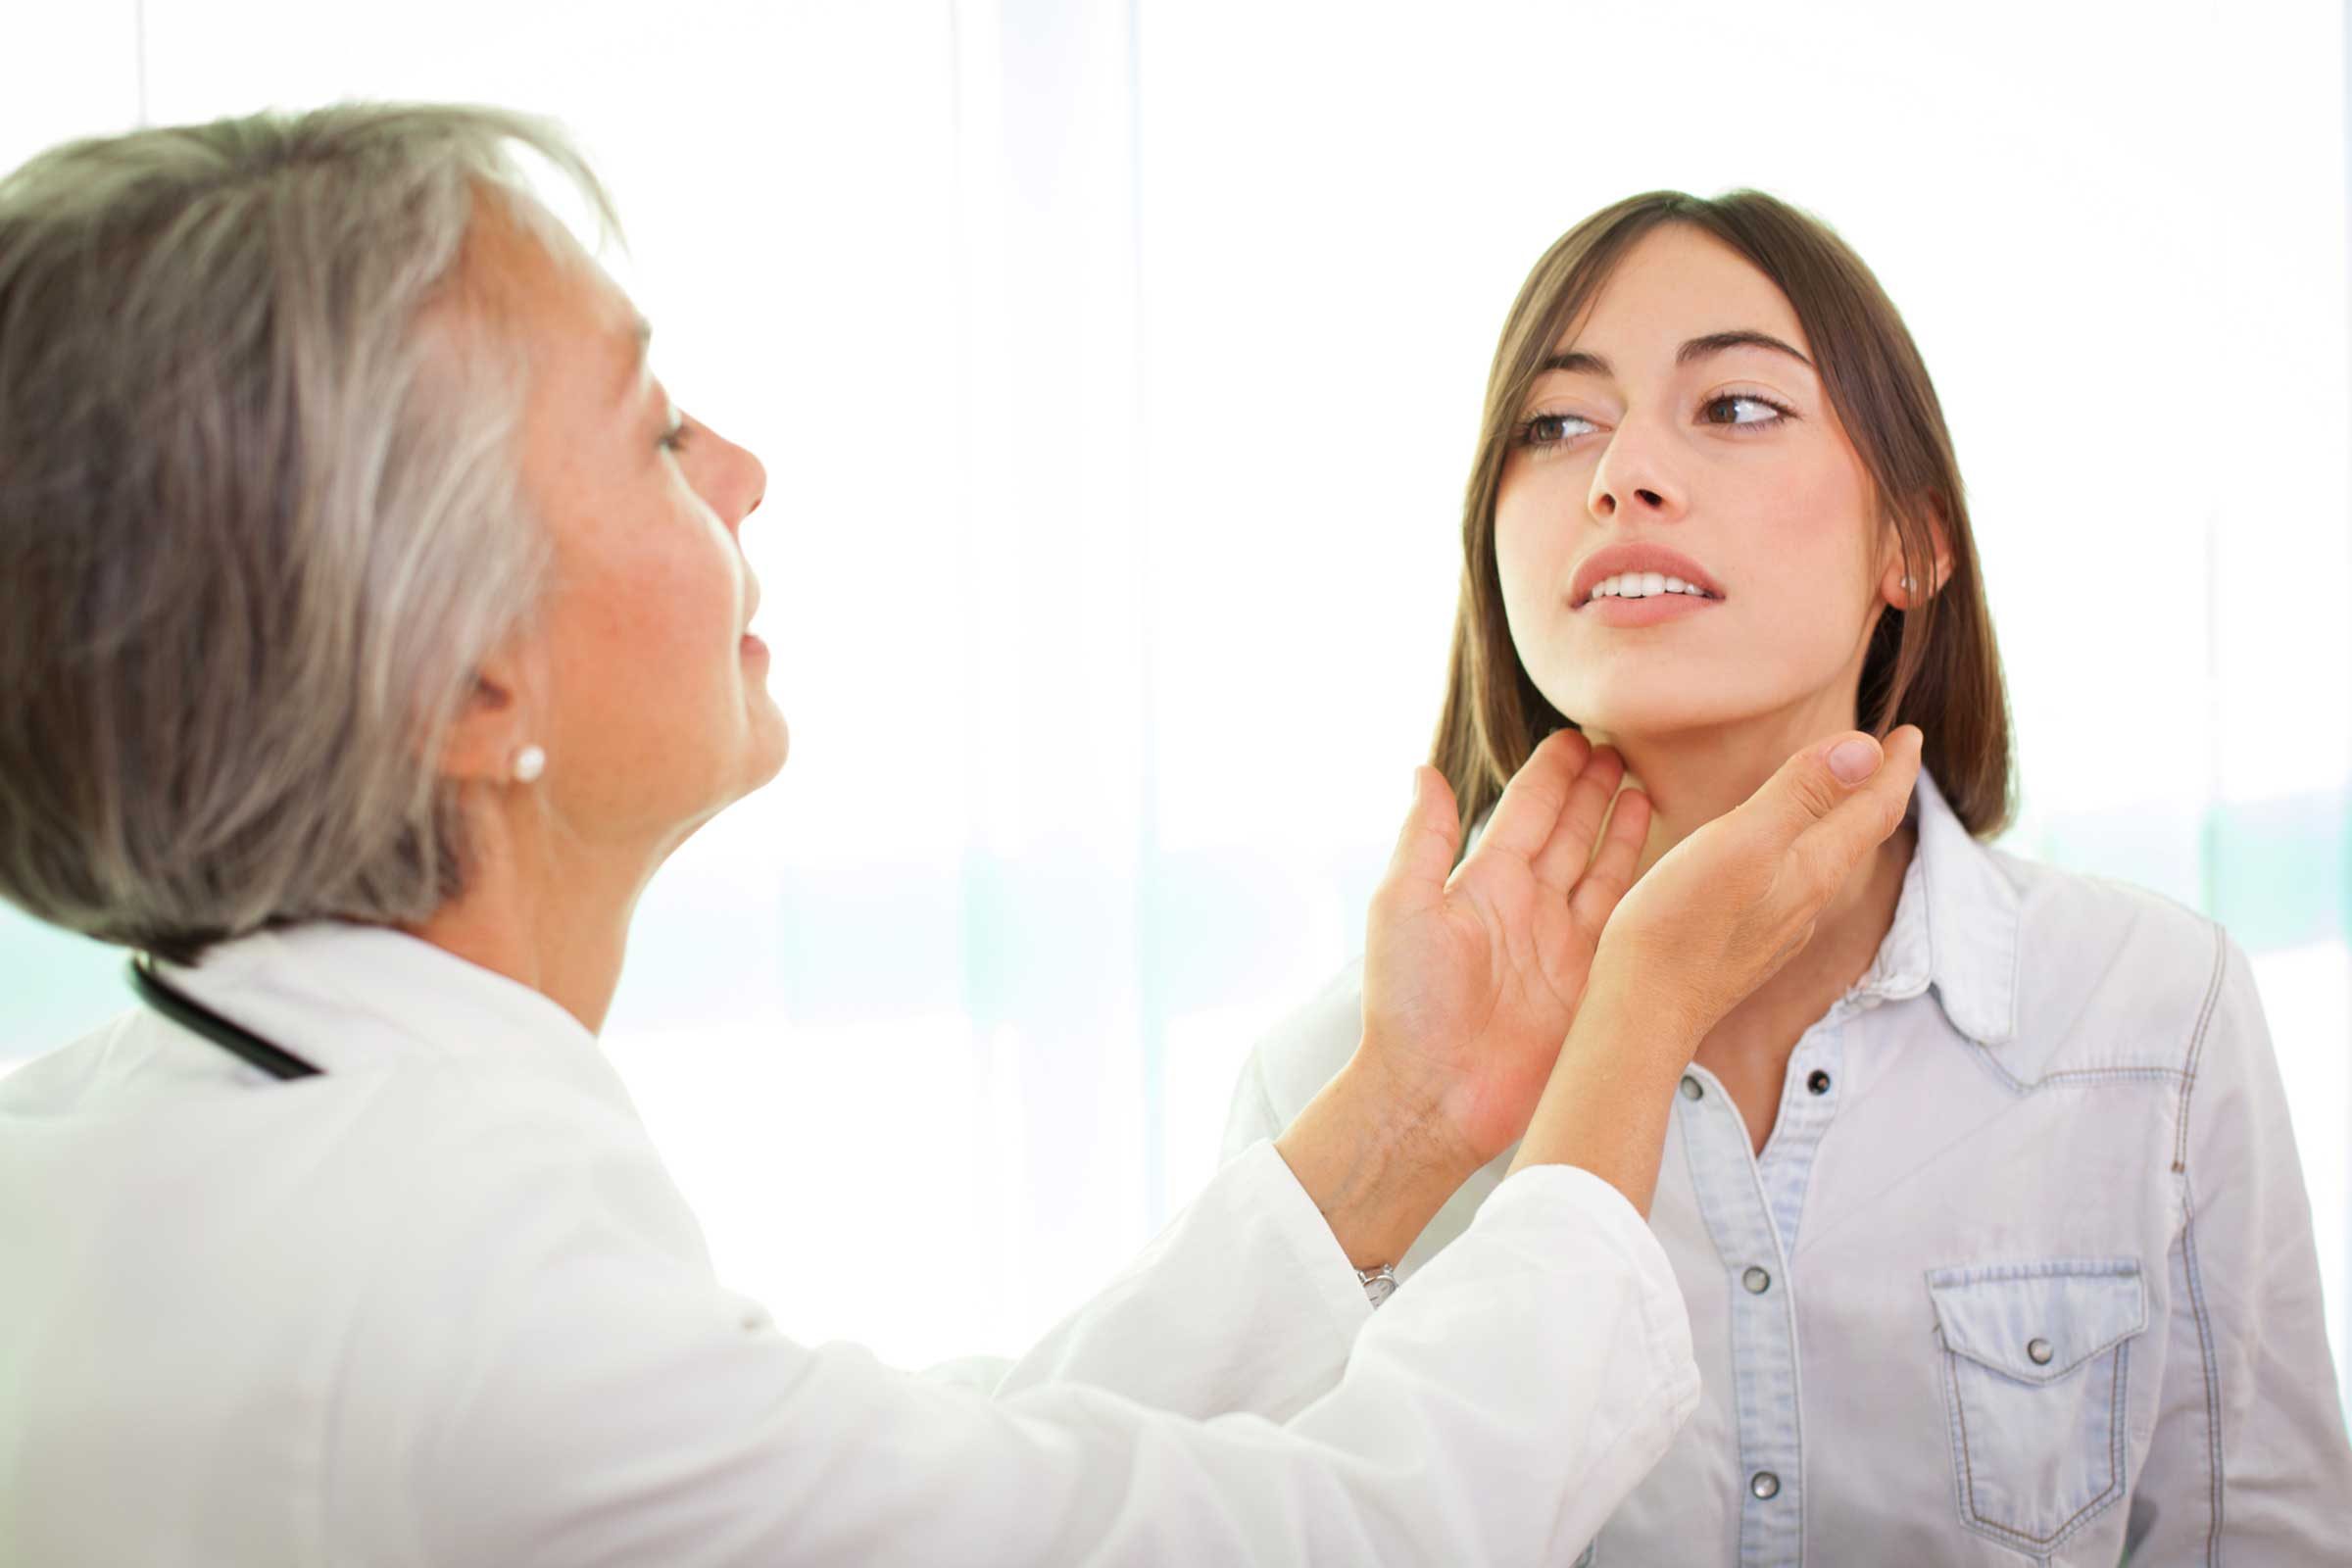 Should You Get Your Thyroid Hormone Levels Checked?